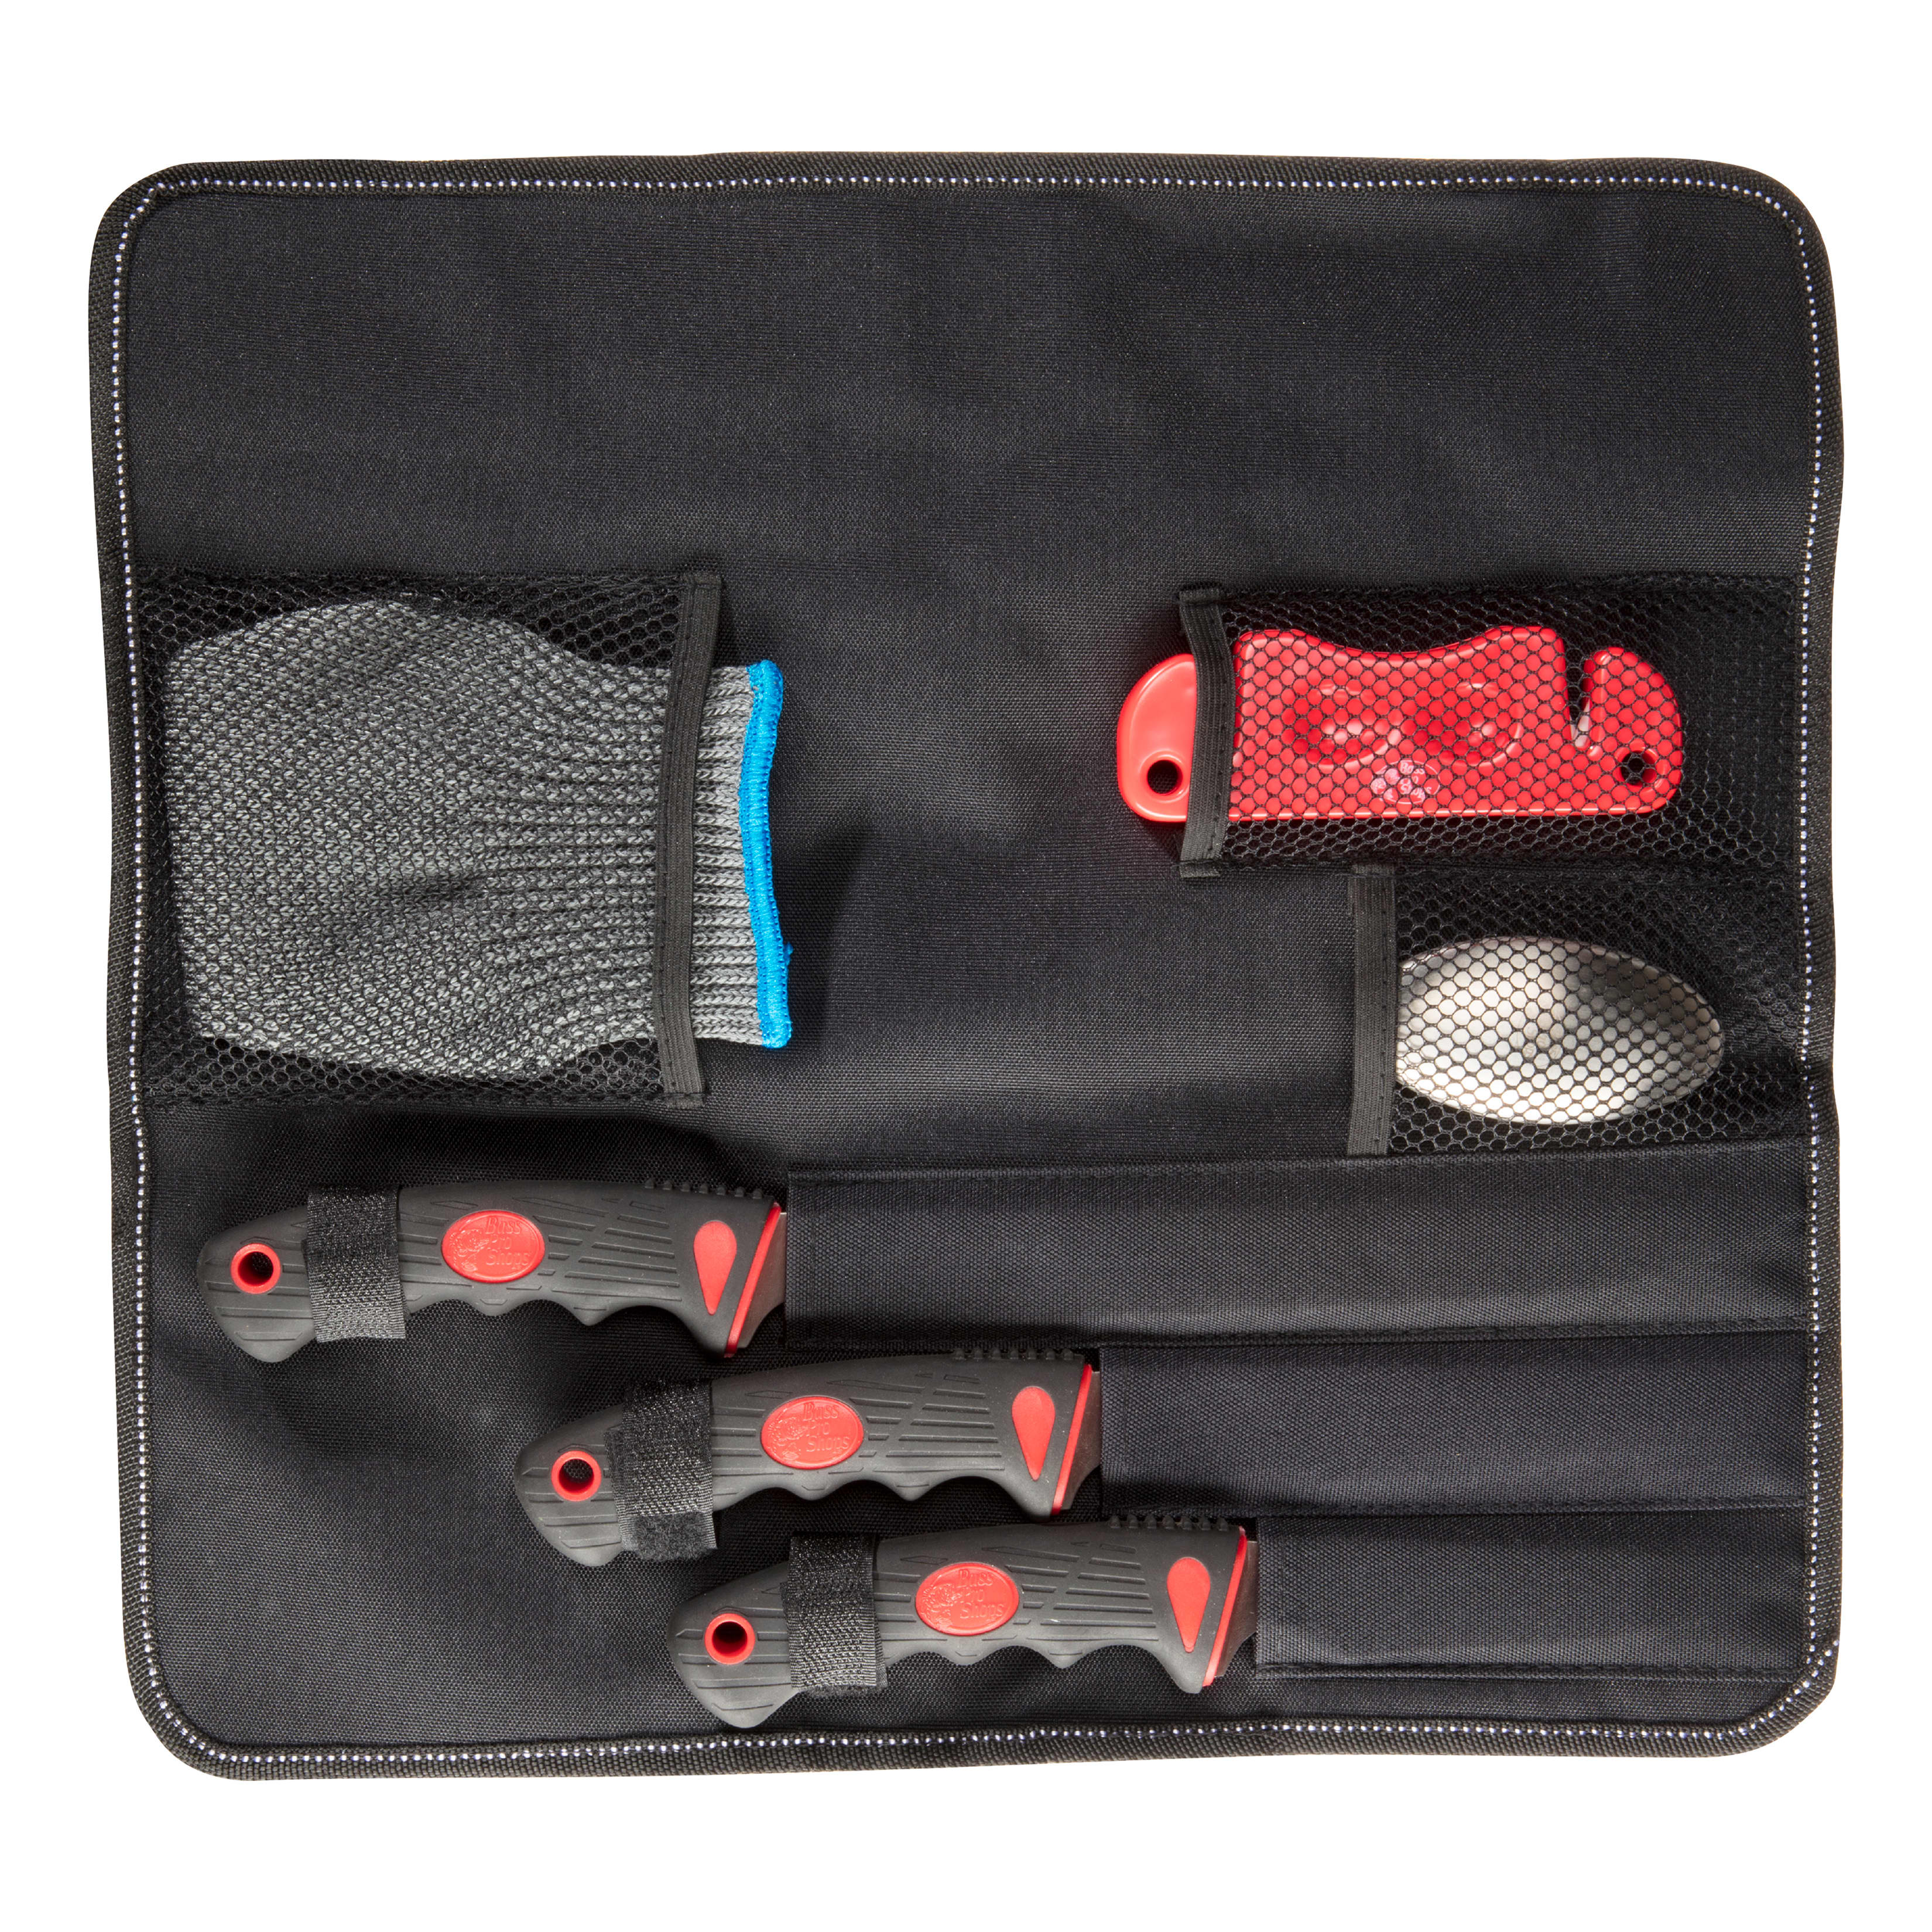 Bass Pro Shops® Grip Master™ Fillet Kit - Roll-Up Safety Case Open View